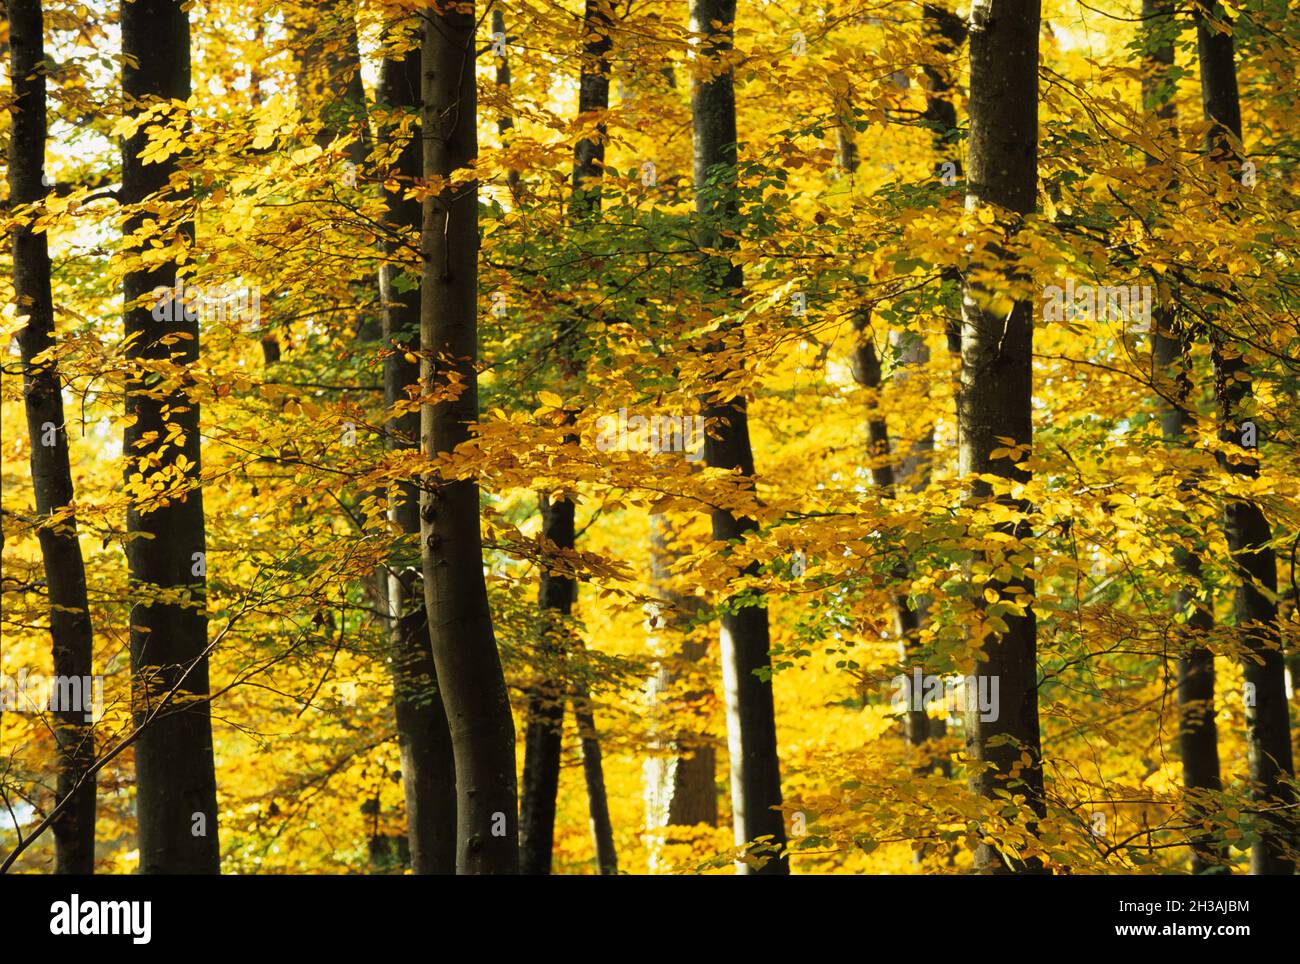 FRANCE. BEECH TREES IN AUTOMN Stock Photo